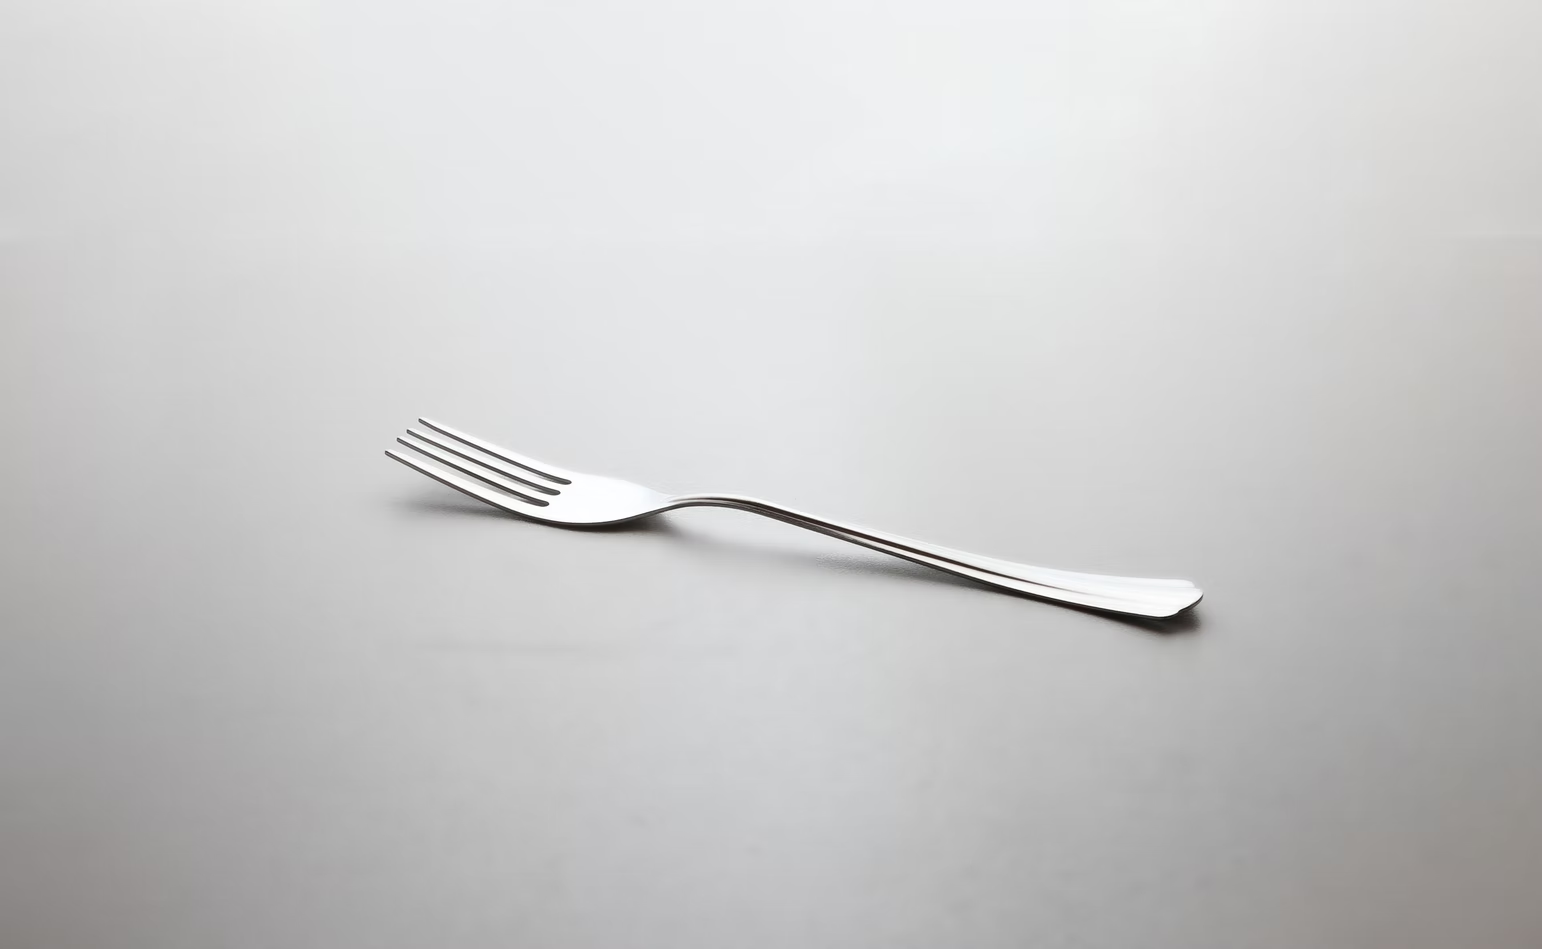 The fork everyone is always talking about